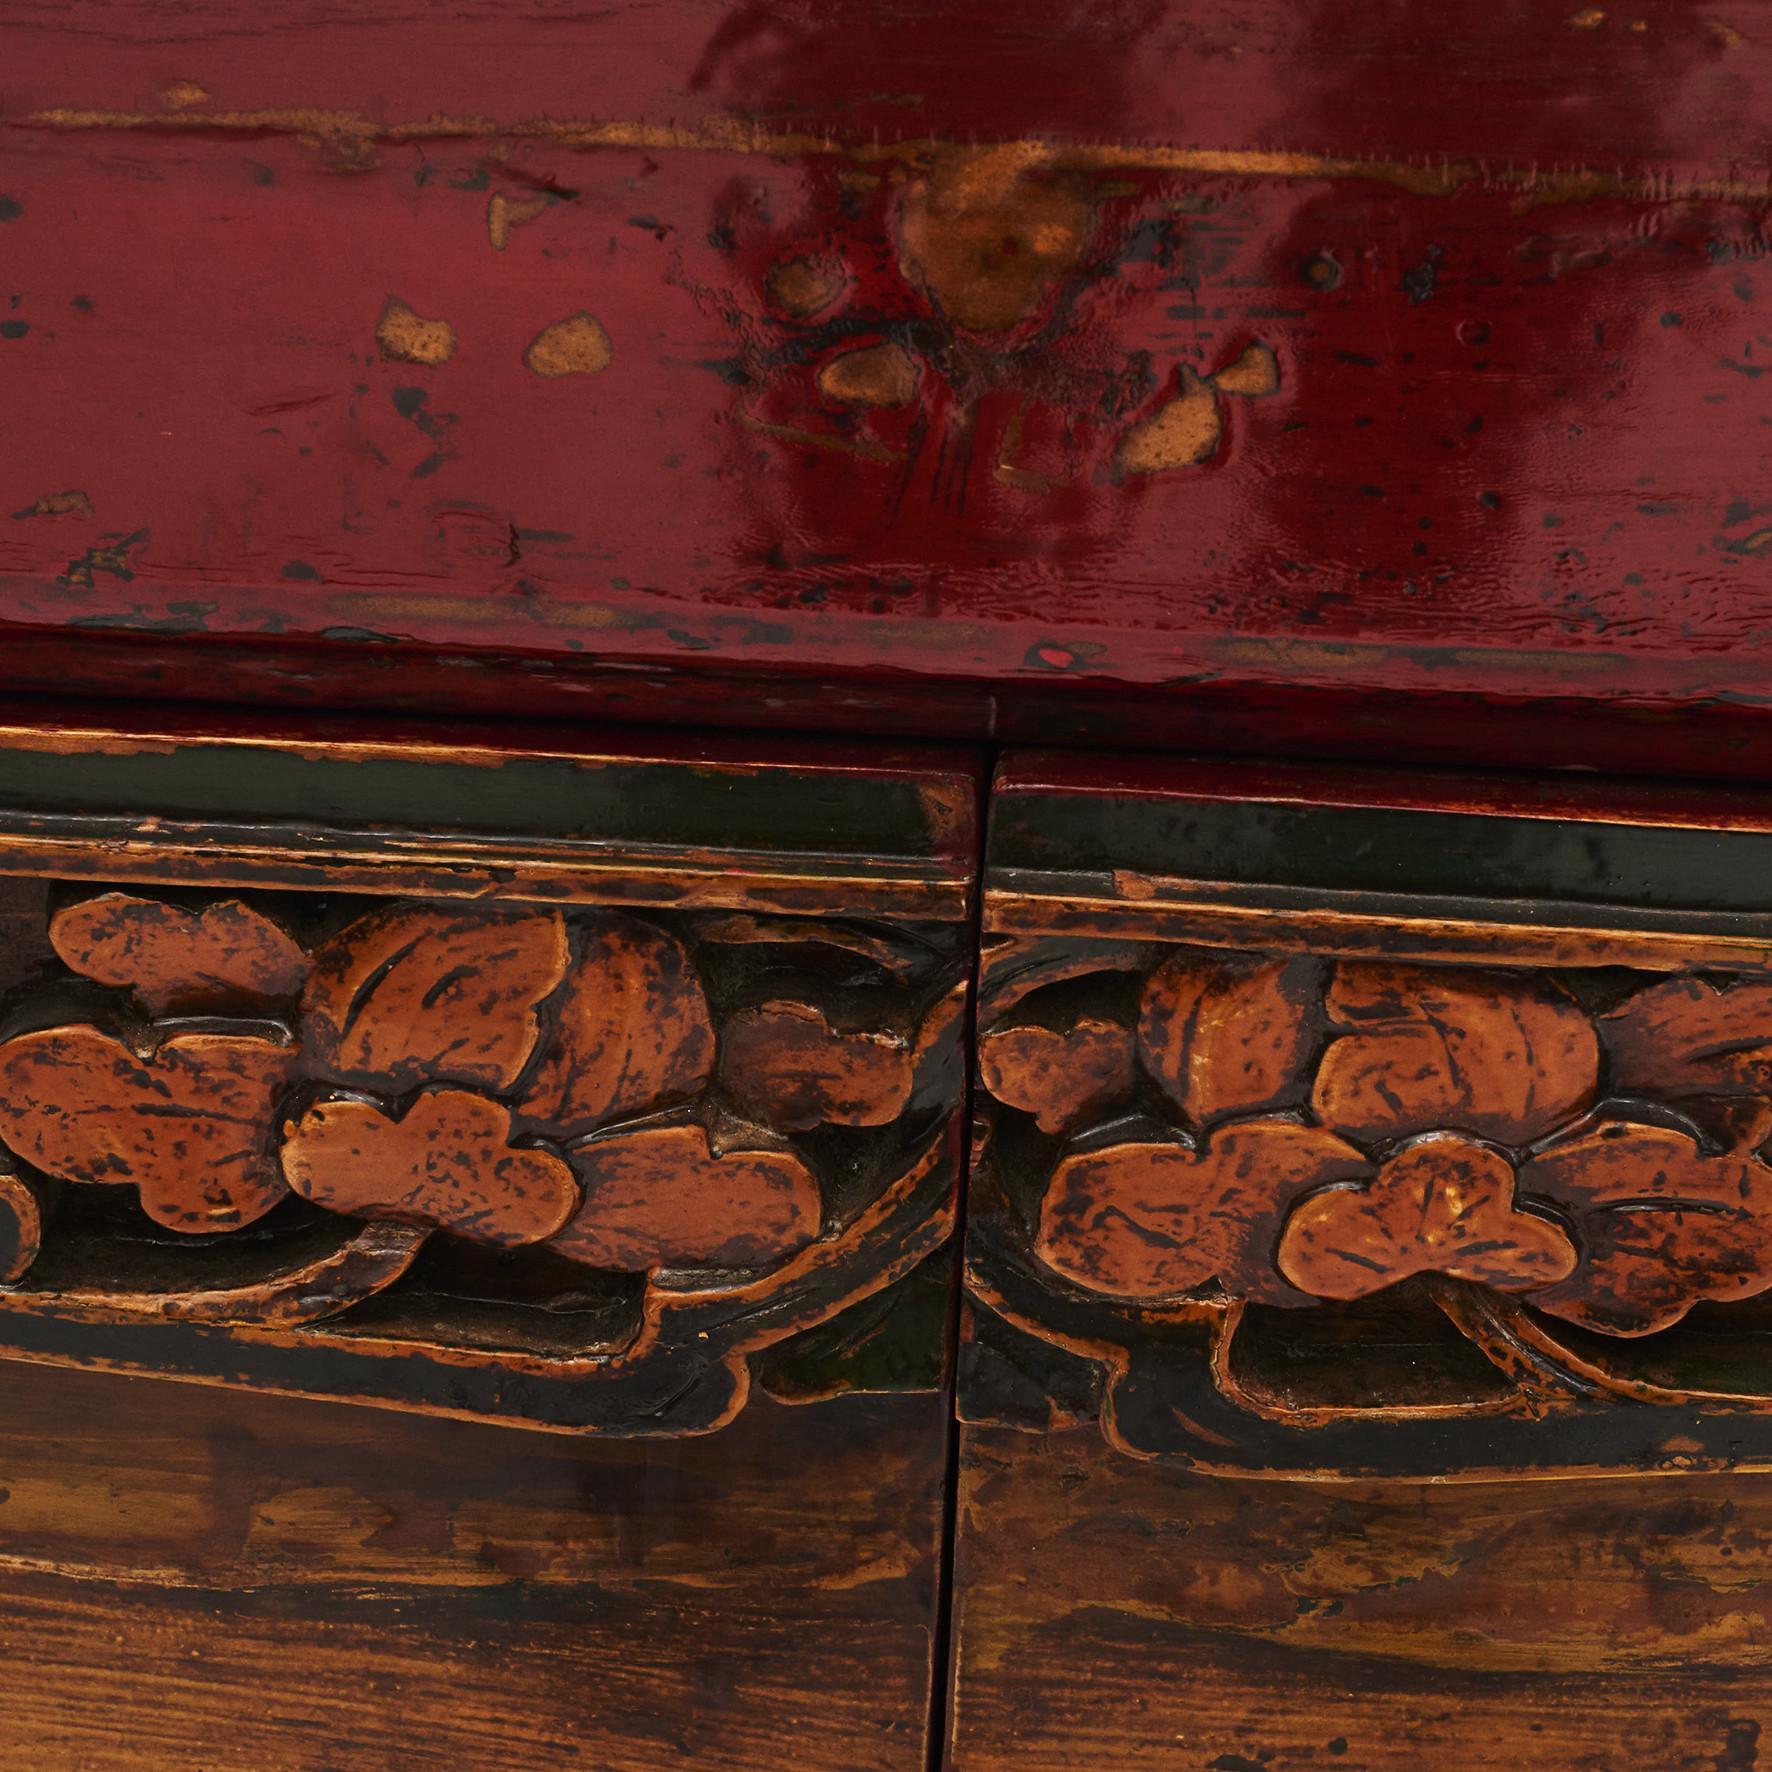 Chinese sideboard in red, green and yellow lacquer decorated with carvings of floral motifs.
Doors with fillings and yellow lacquer with decorations in the form of a nature scenery with trees, mountains etc.

Original condition with beautiful patina